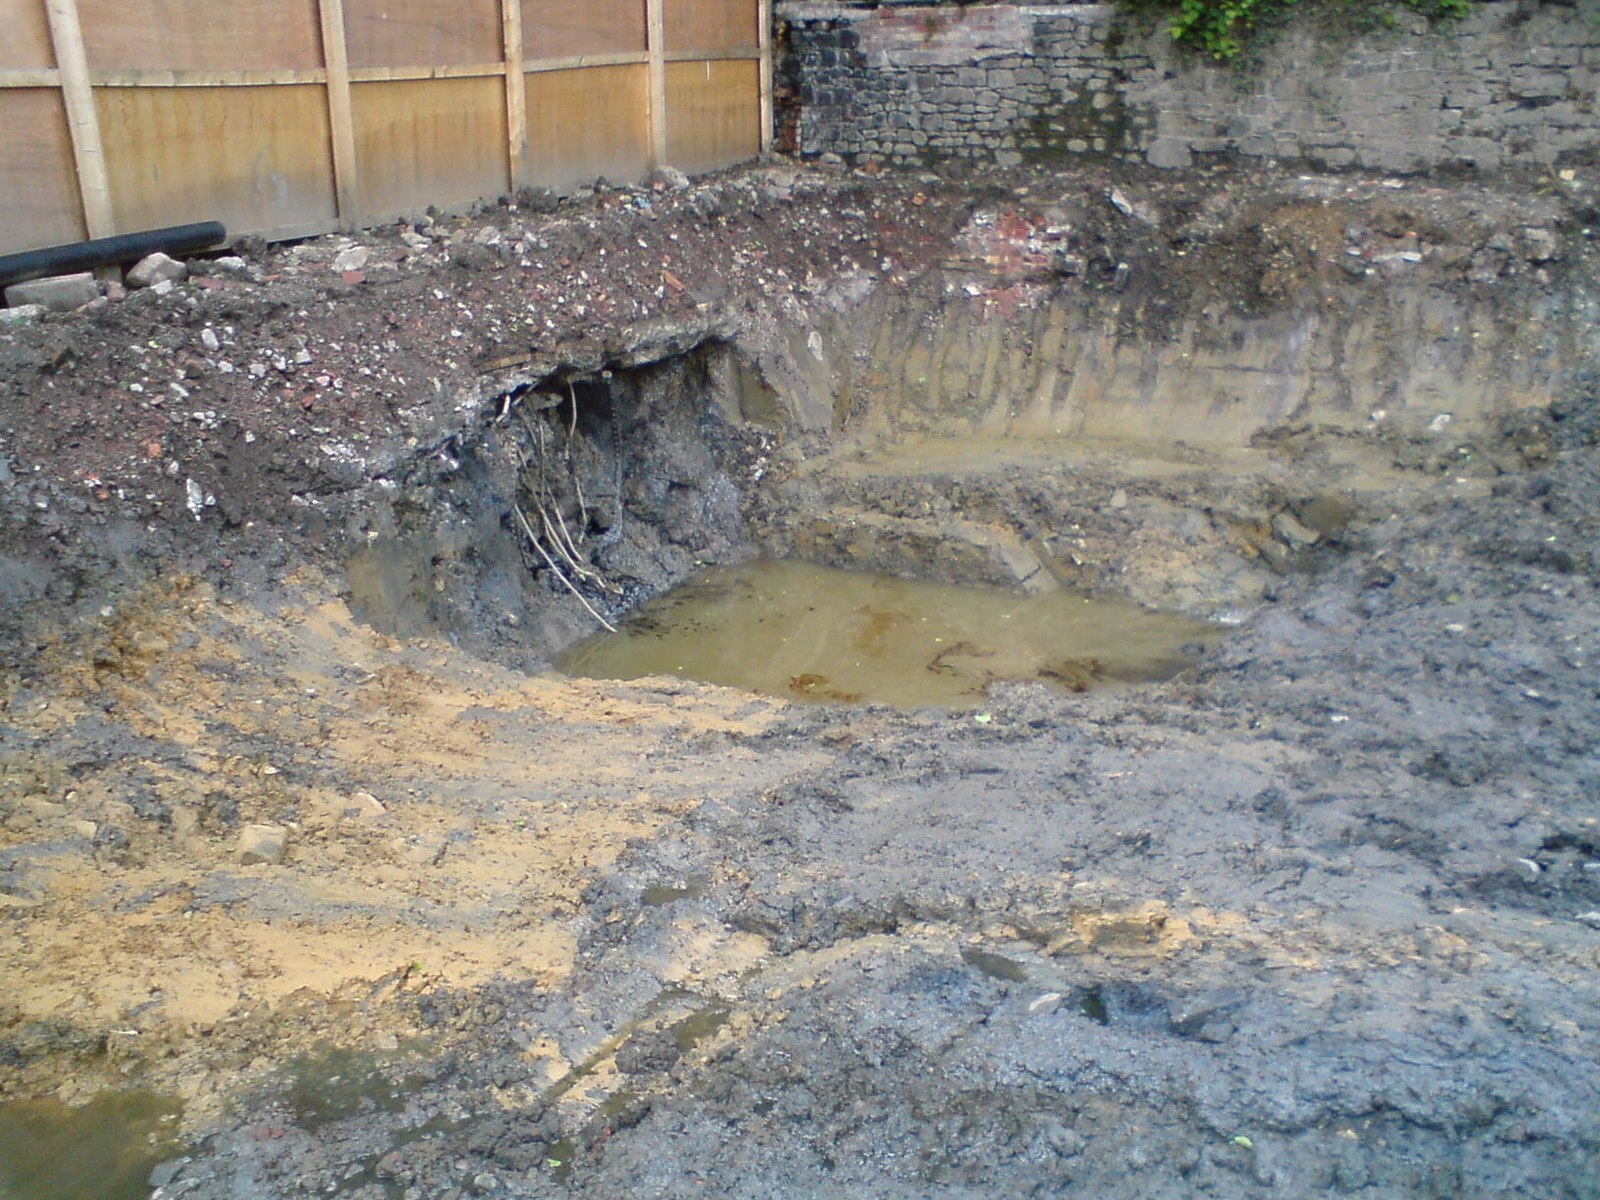 Dealing With Contaminated Soil in Construction Projects 1